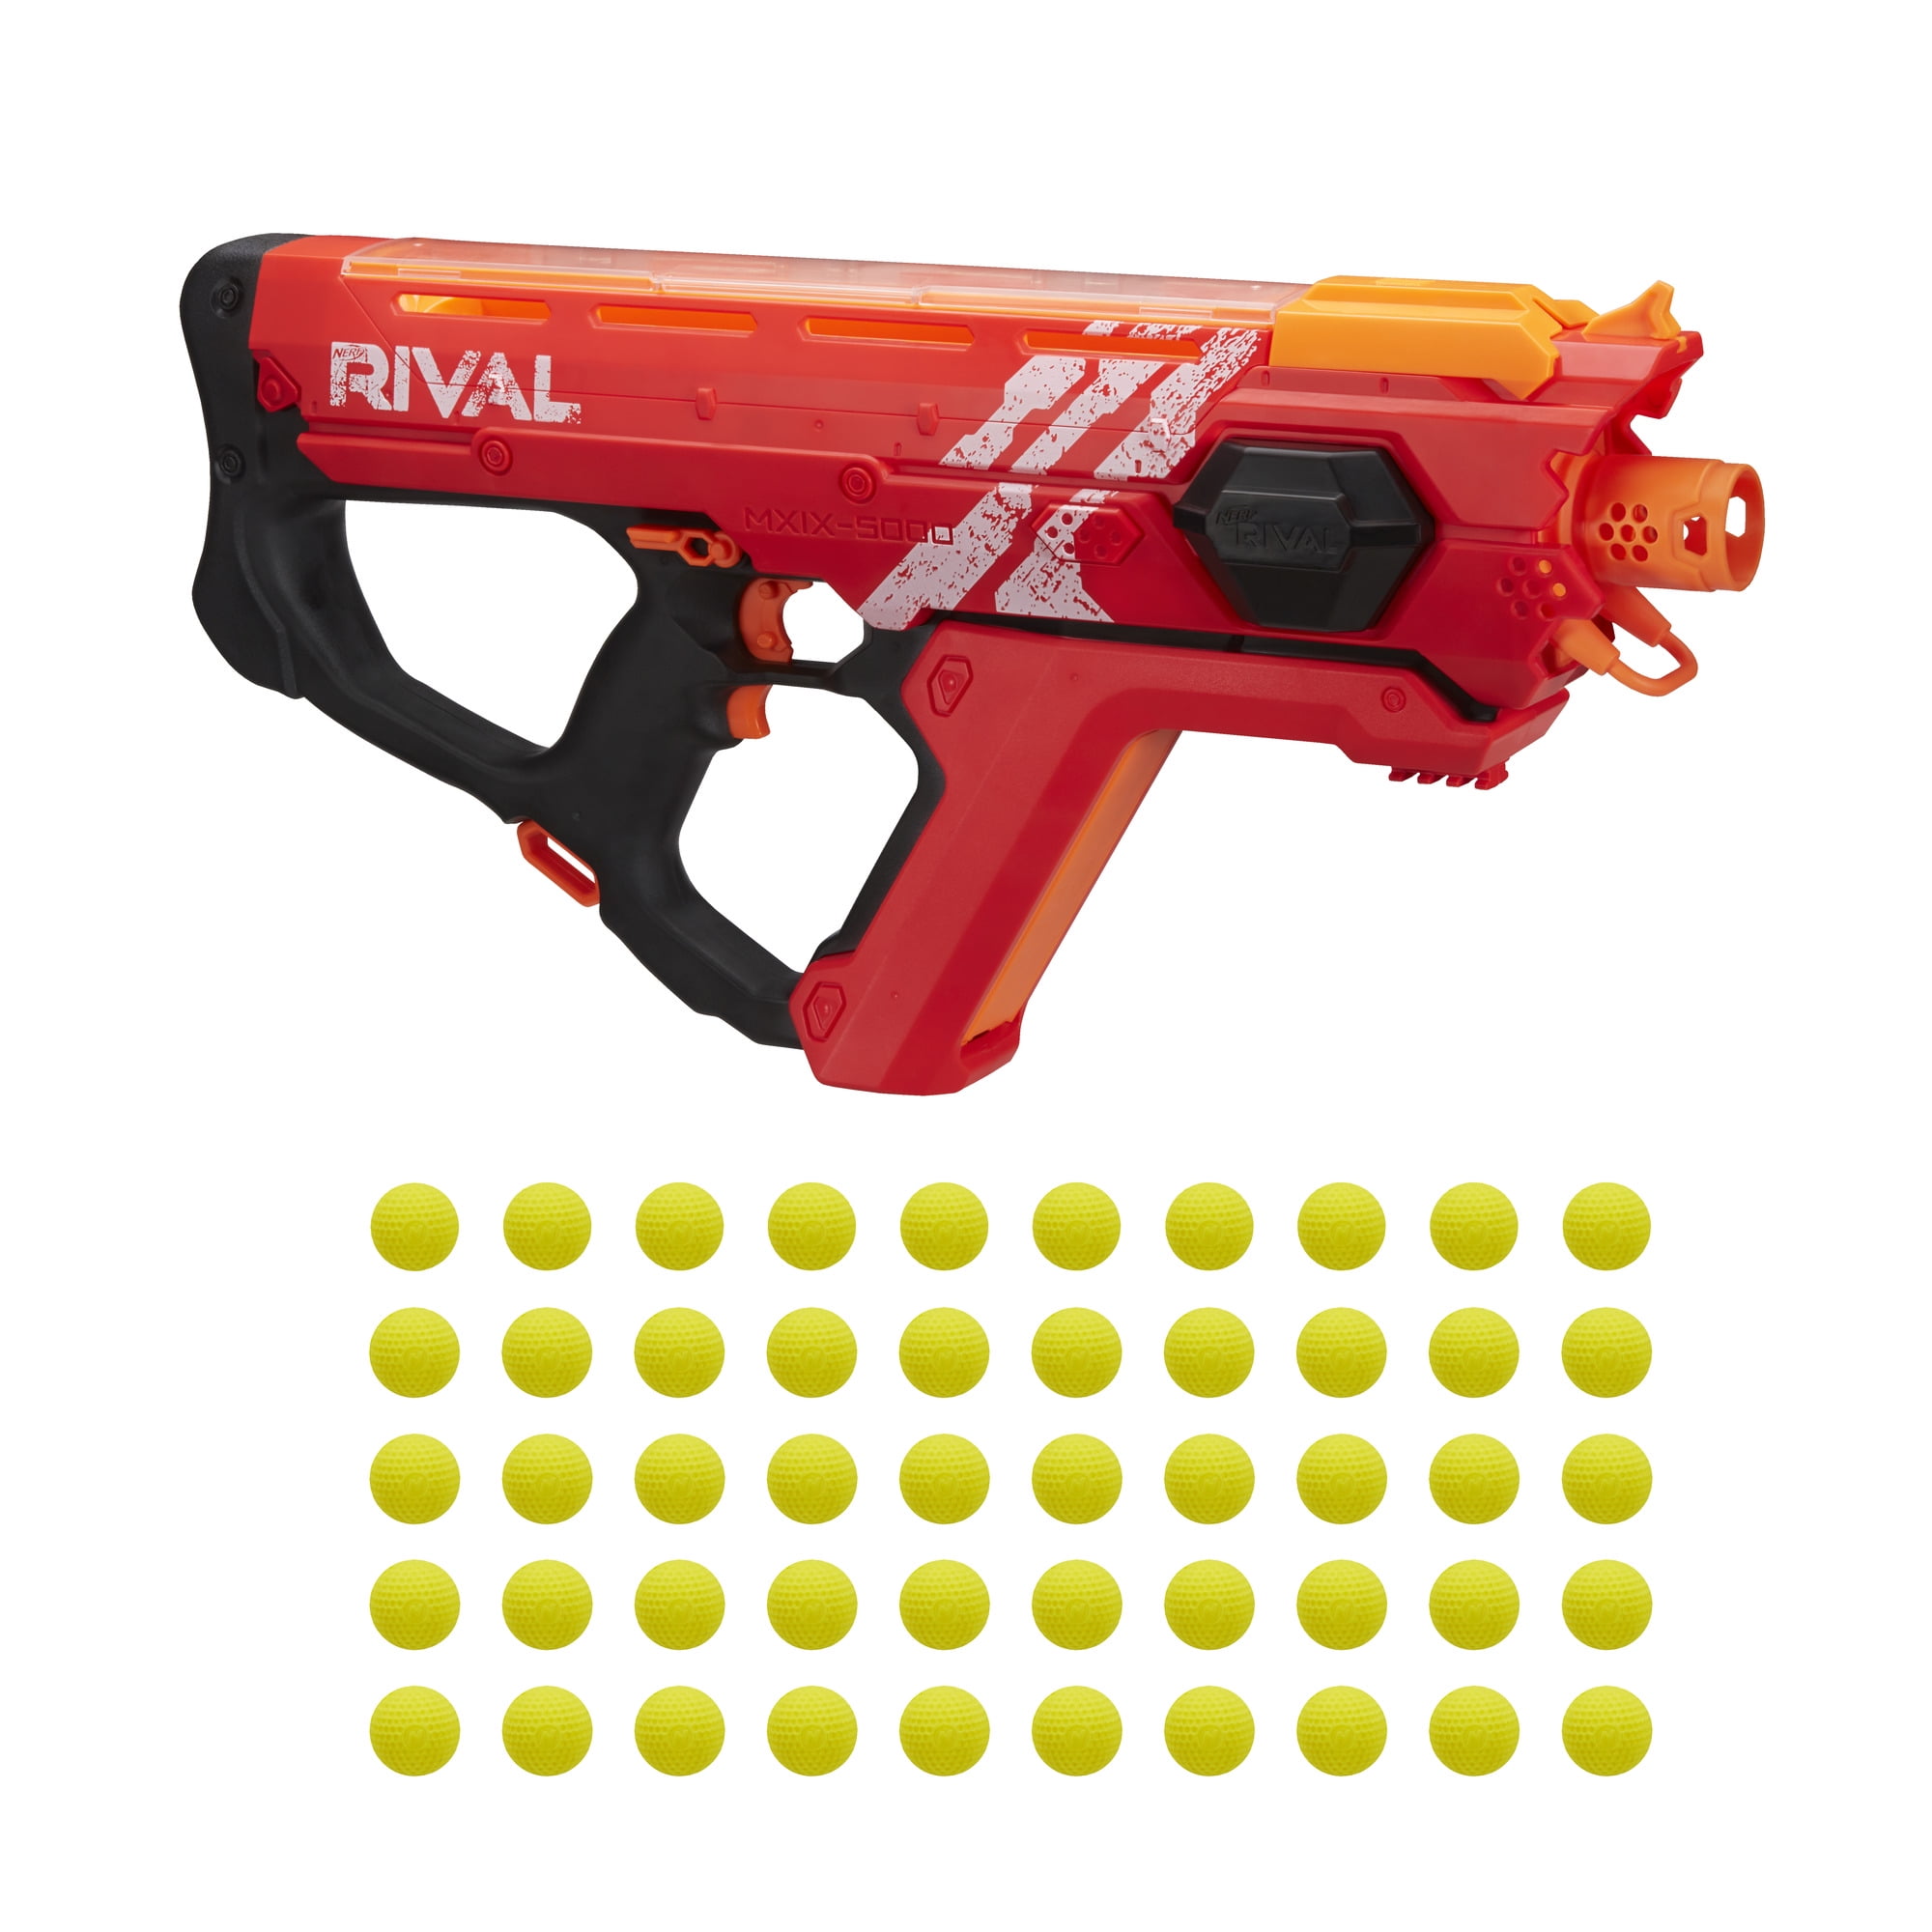 Nerf Rival Advanced Targeting Set 90 FPS 3 Rounds Included Team Blue Target 2019 for sale online 